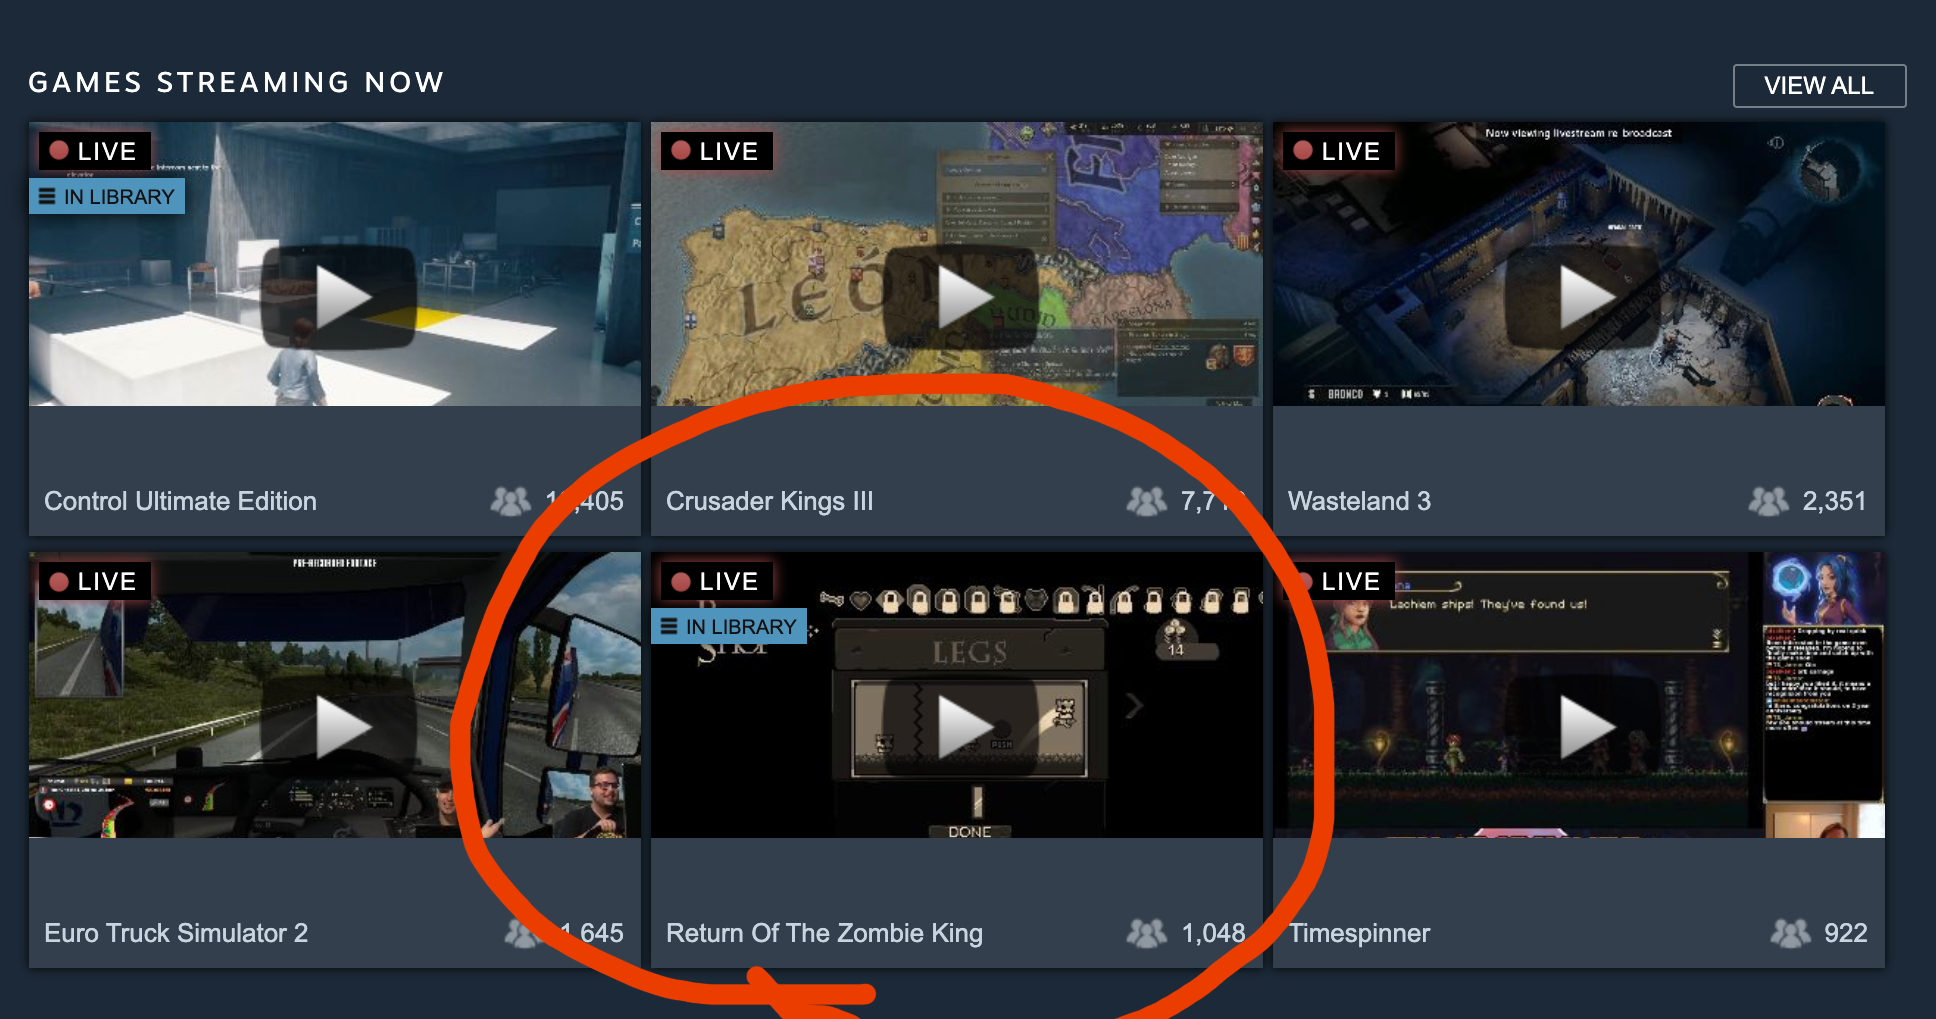 How to Broadcast On Steam